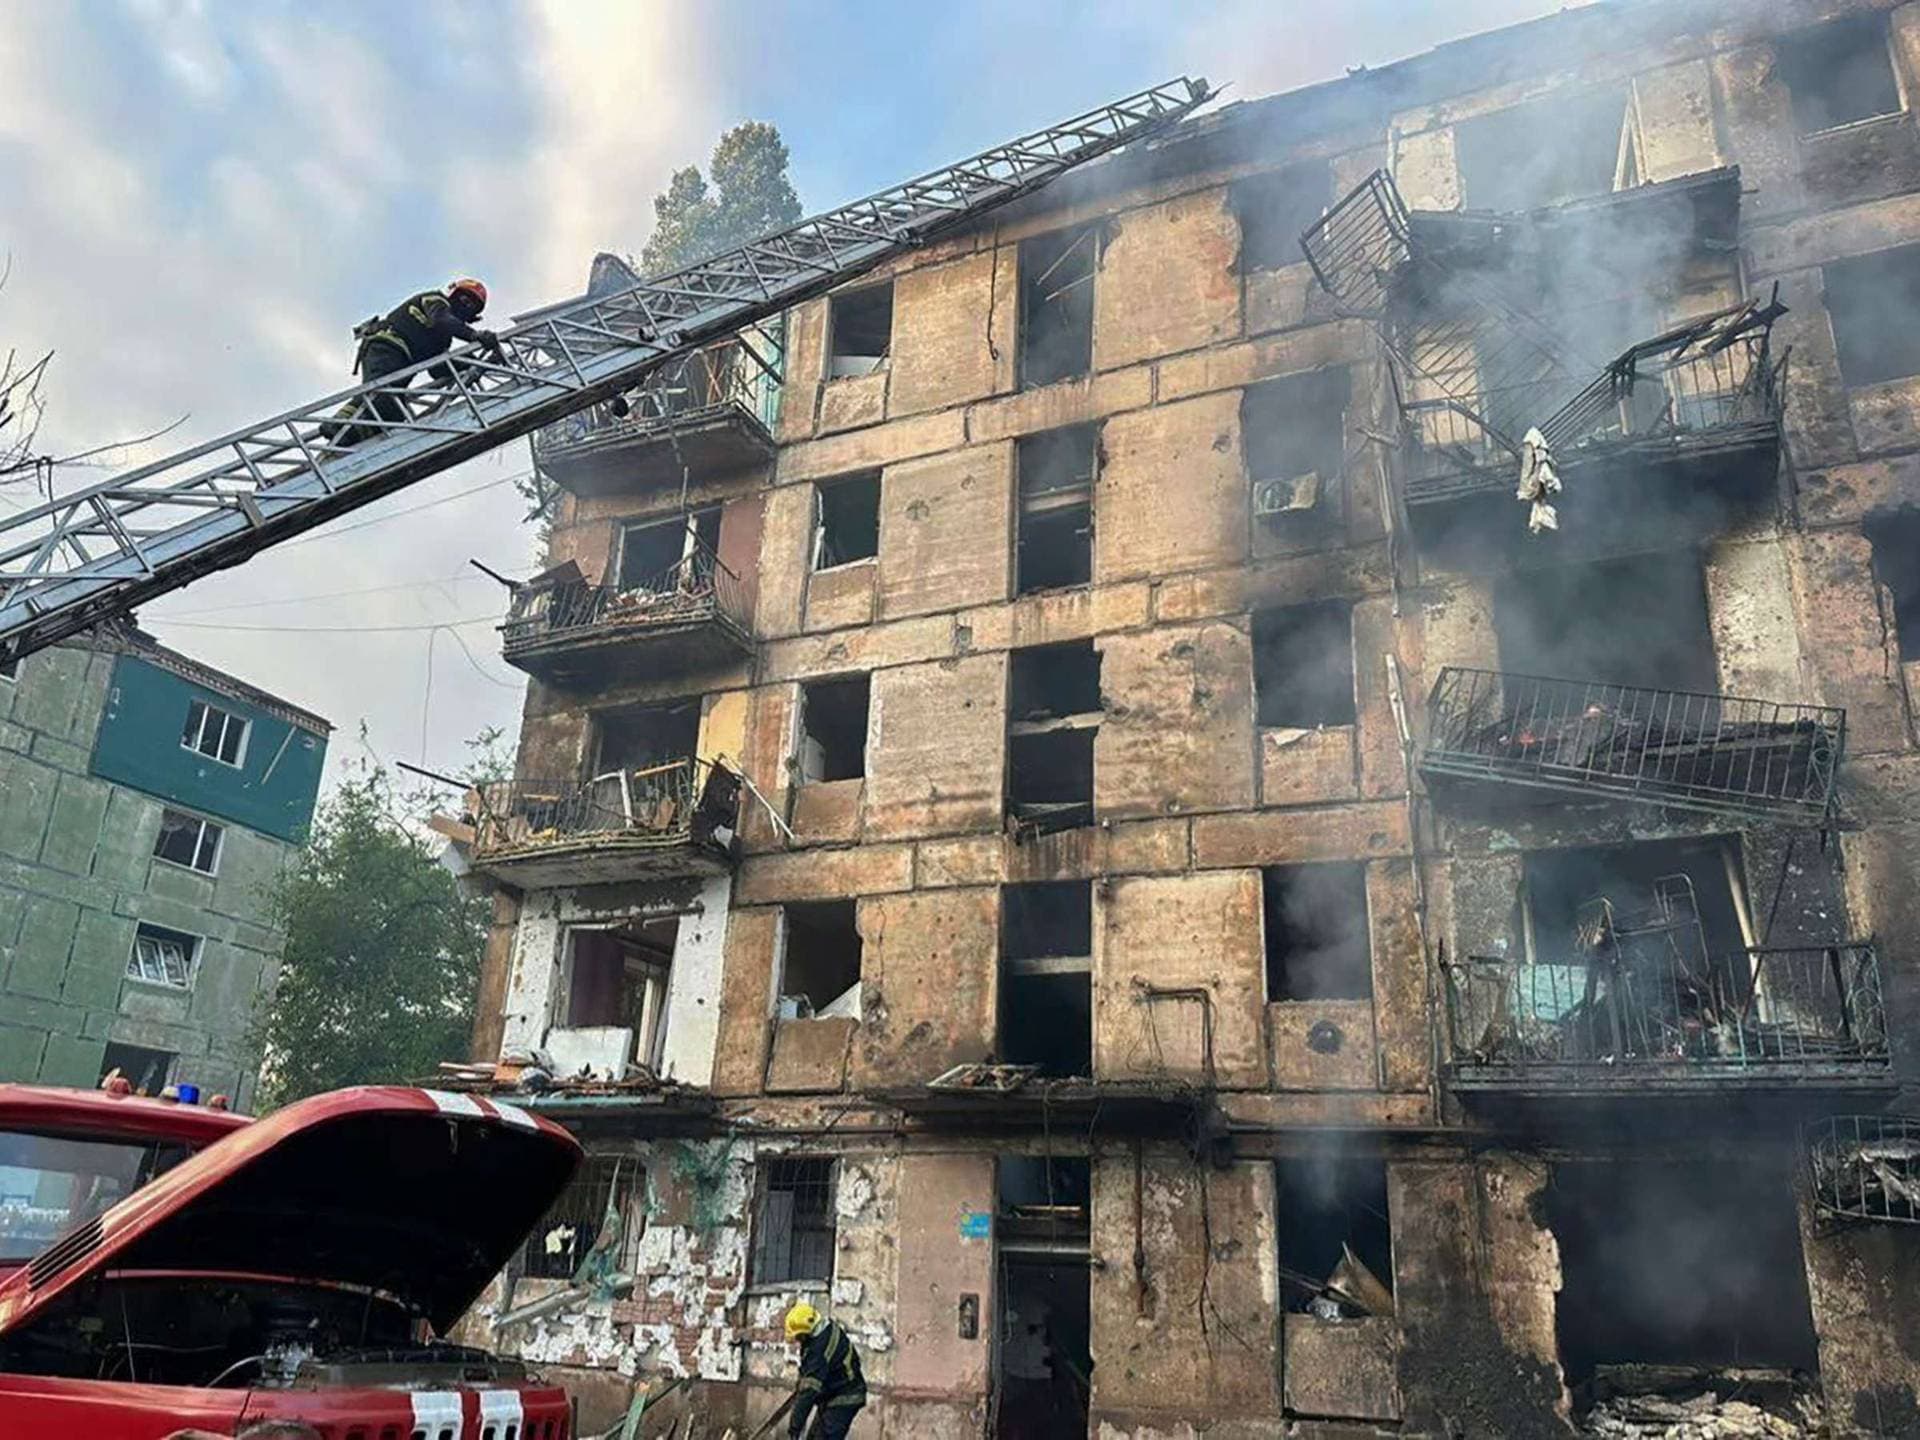 In this photo released by Dnipro Regional Administration, emergency workers extinguish a fire after missiles hit a multi-story apartment building in Kryvyi Rih